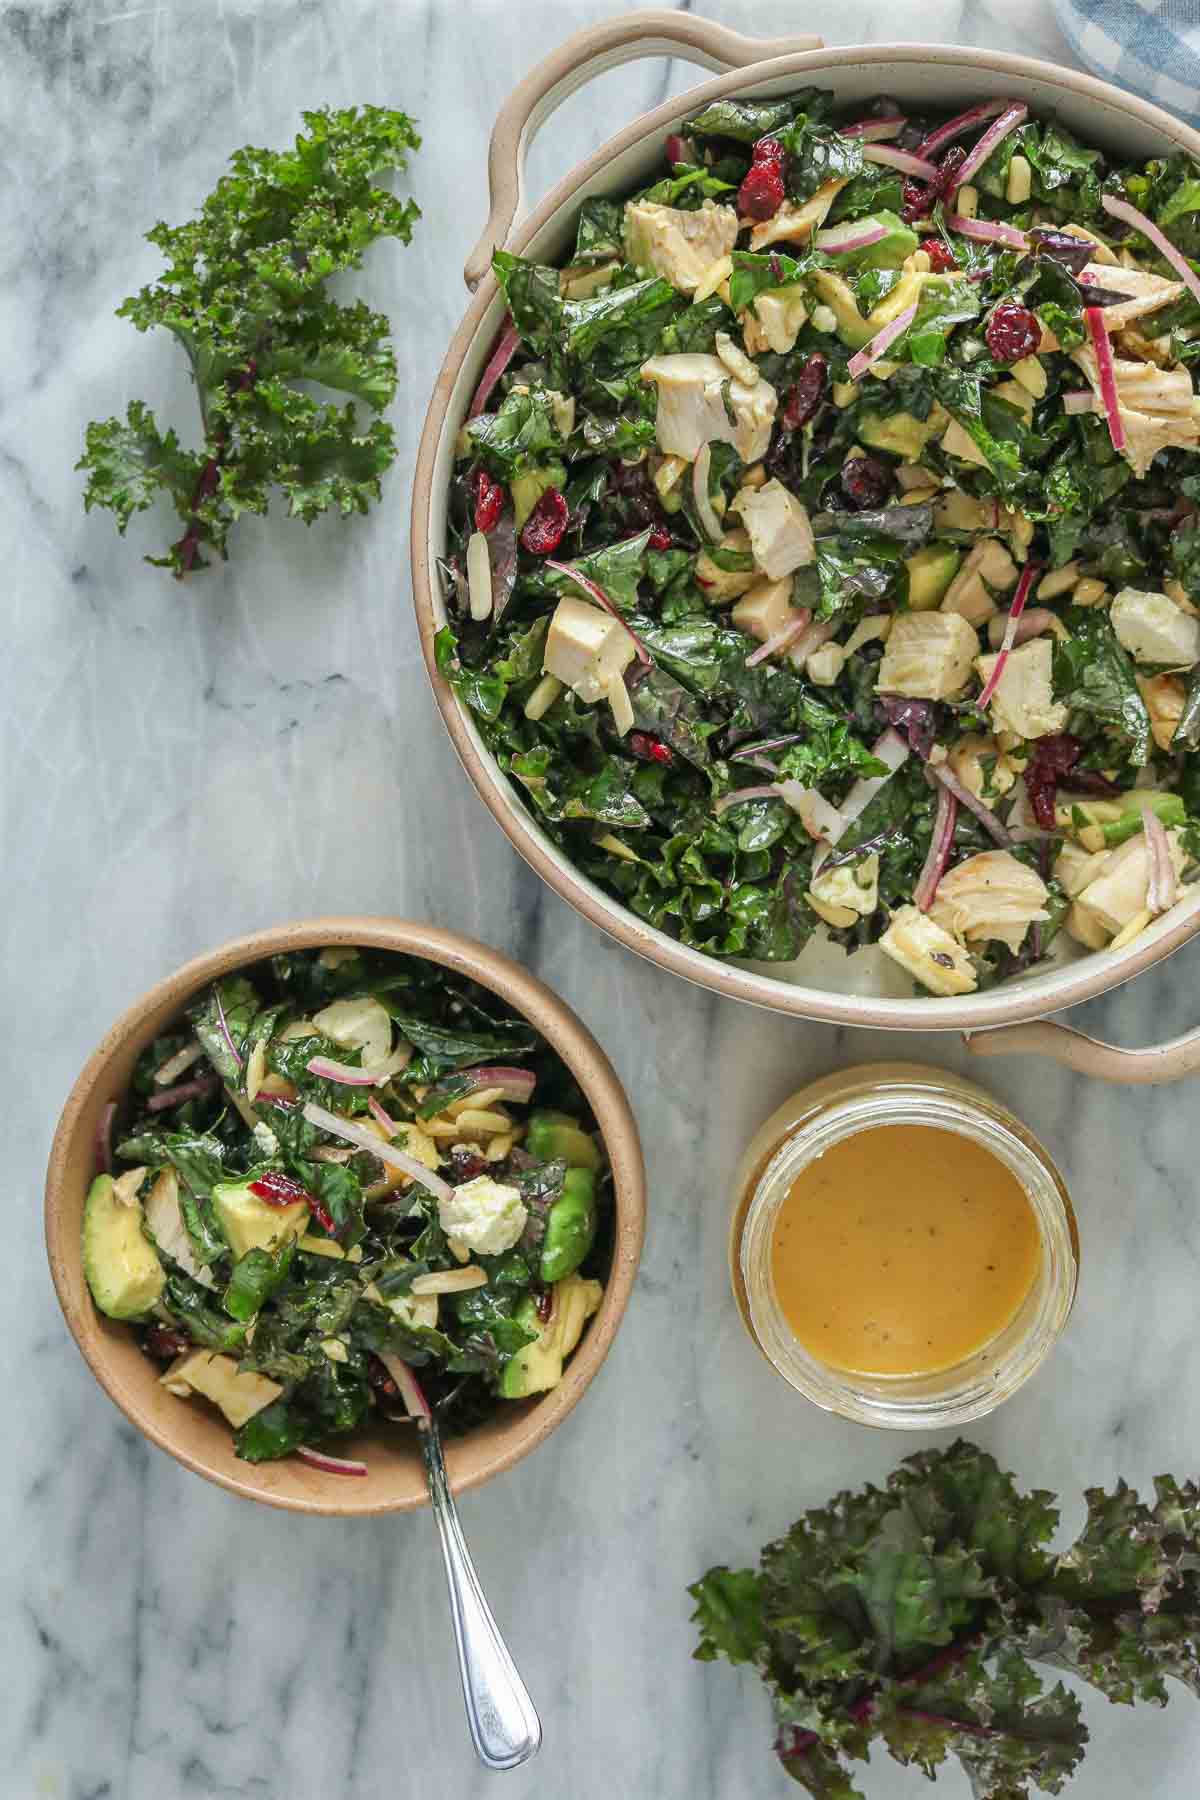 Chicken and kale salad, some in a larger bowl and some in a smaller bowl.